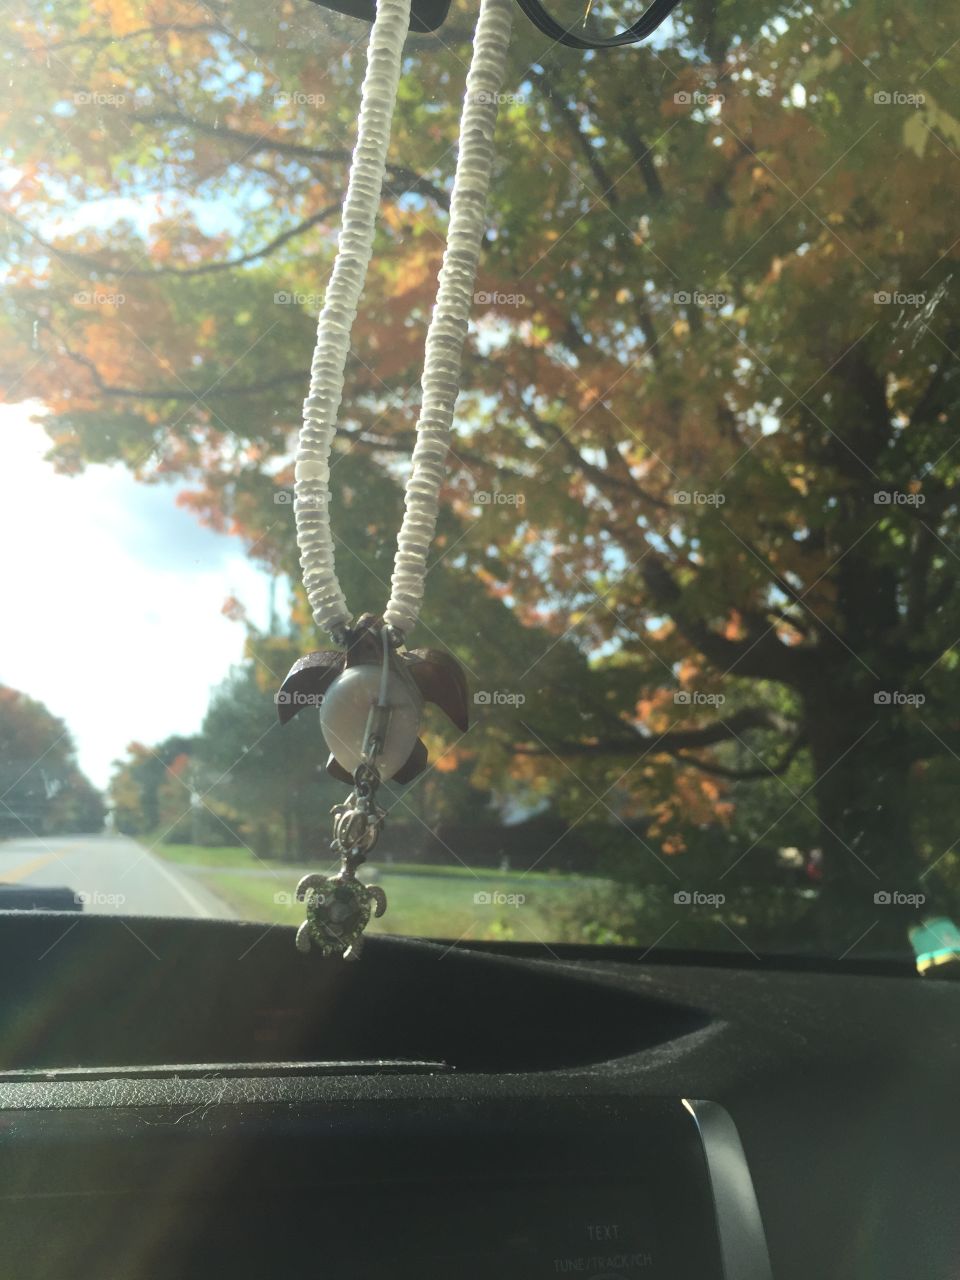 My view on my way to work every day. My turtle given to me by a friend that I now live far away from.